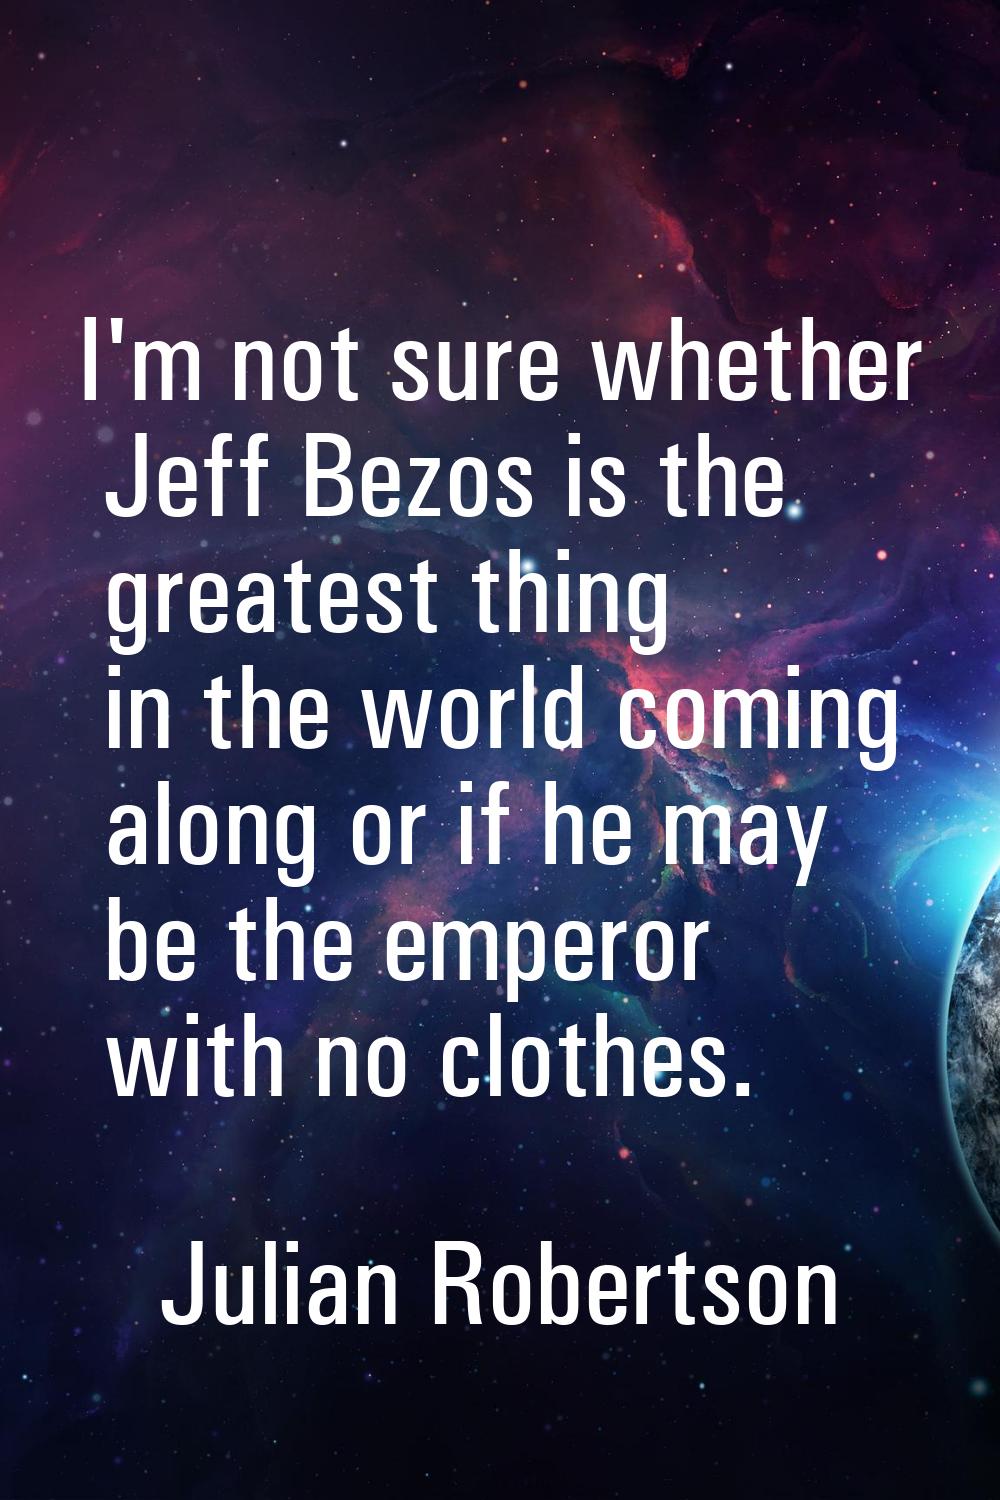 I'm not sure whether Jeff Bezos is the greatest thing in the world coming along or if he may be the